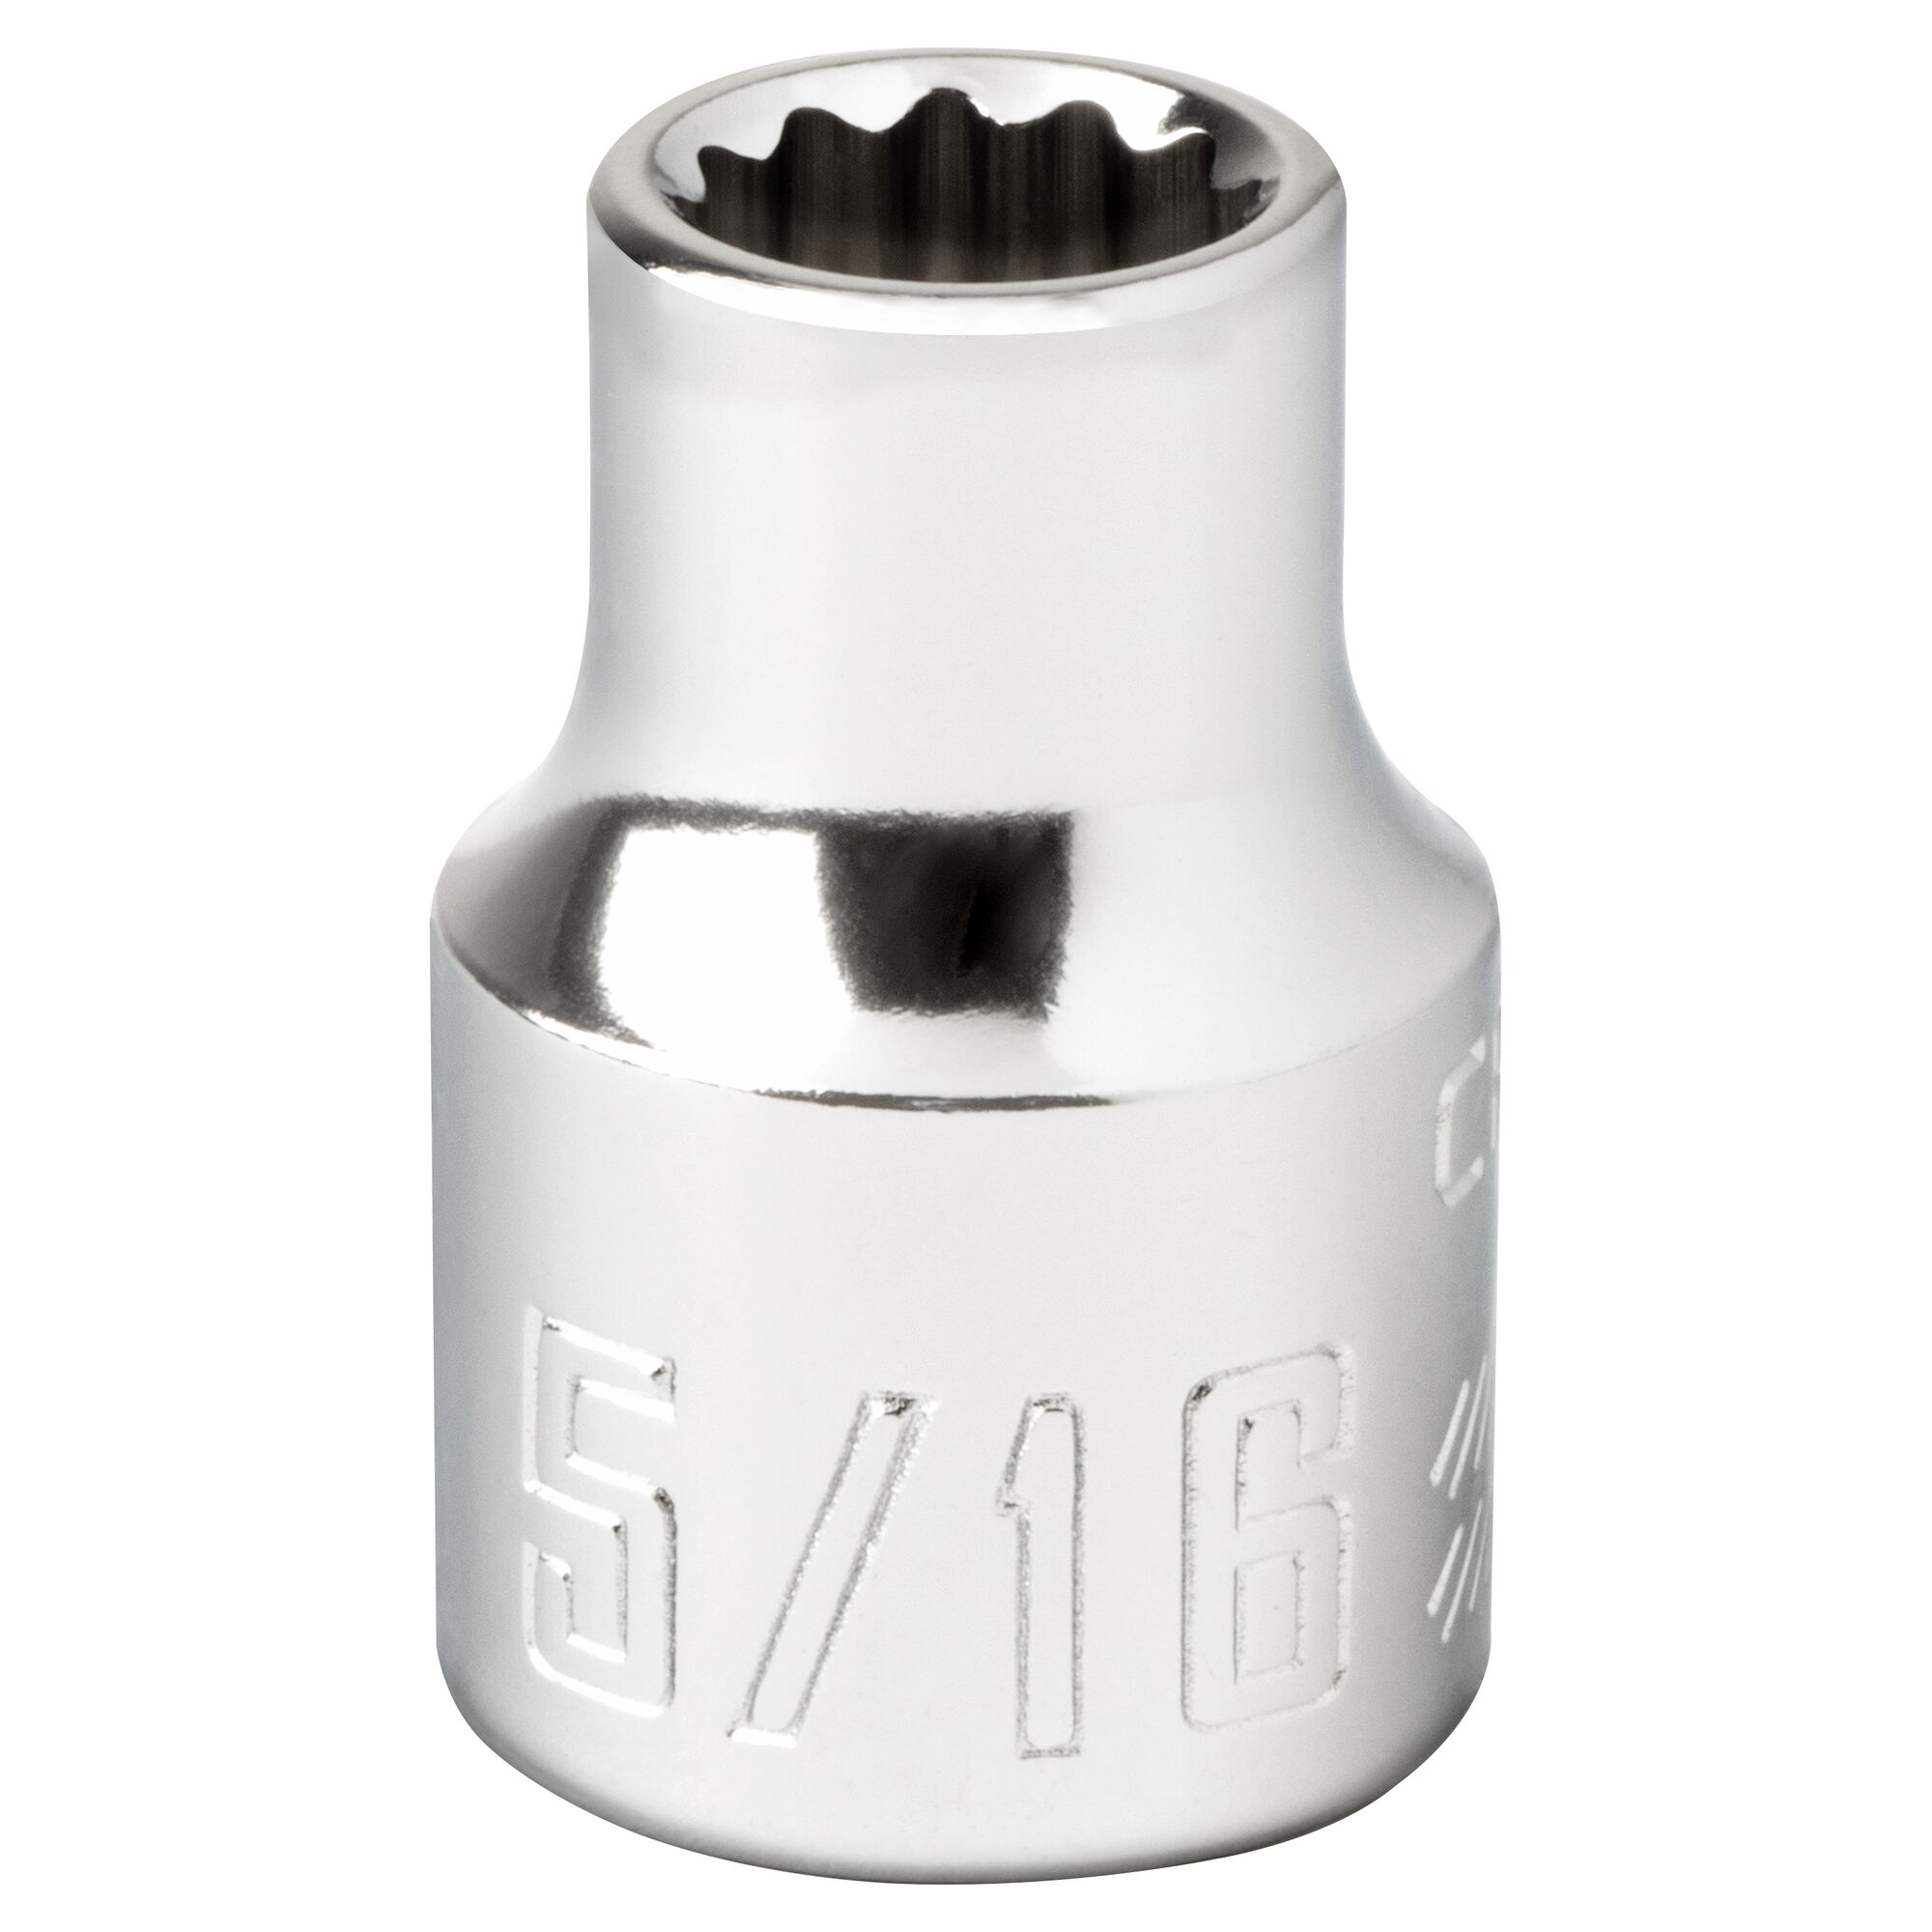 View of CRAFTSMAN Sockets: 12-Point on white background